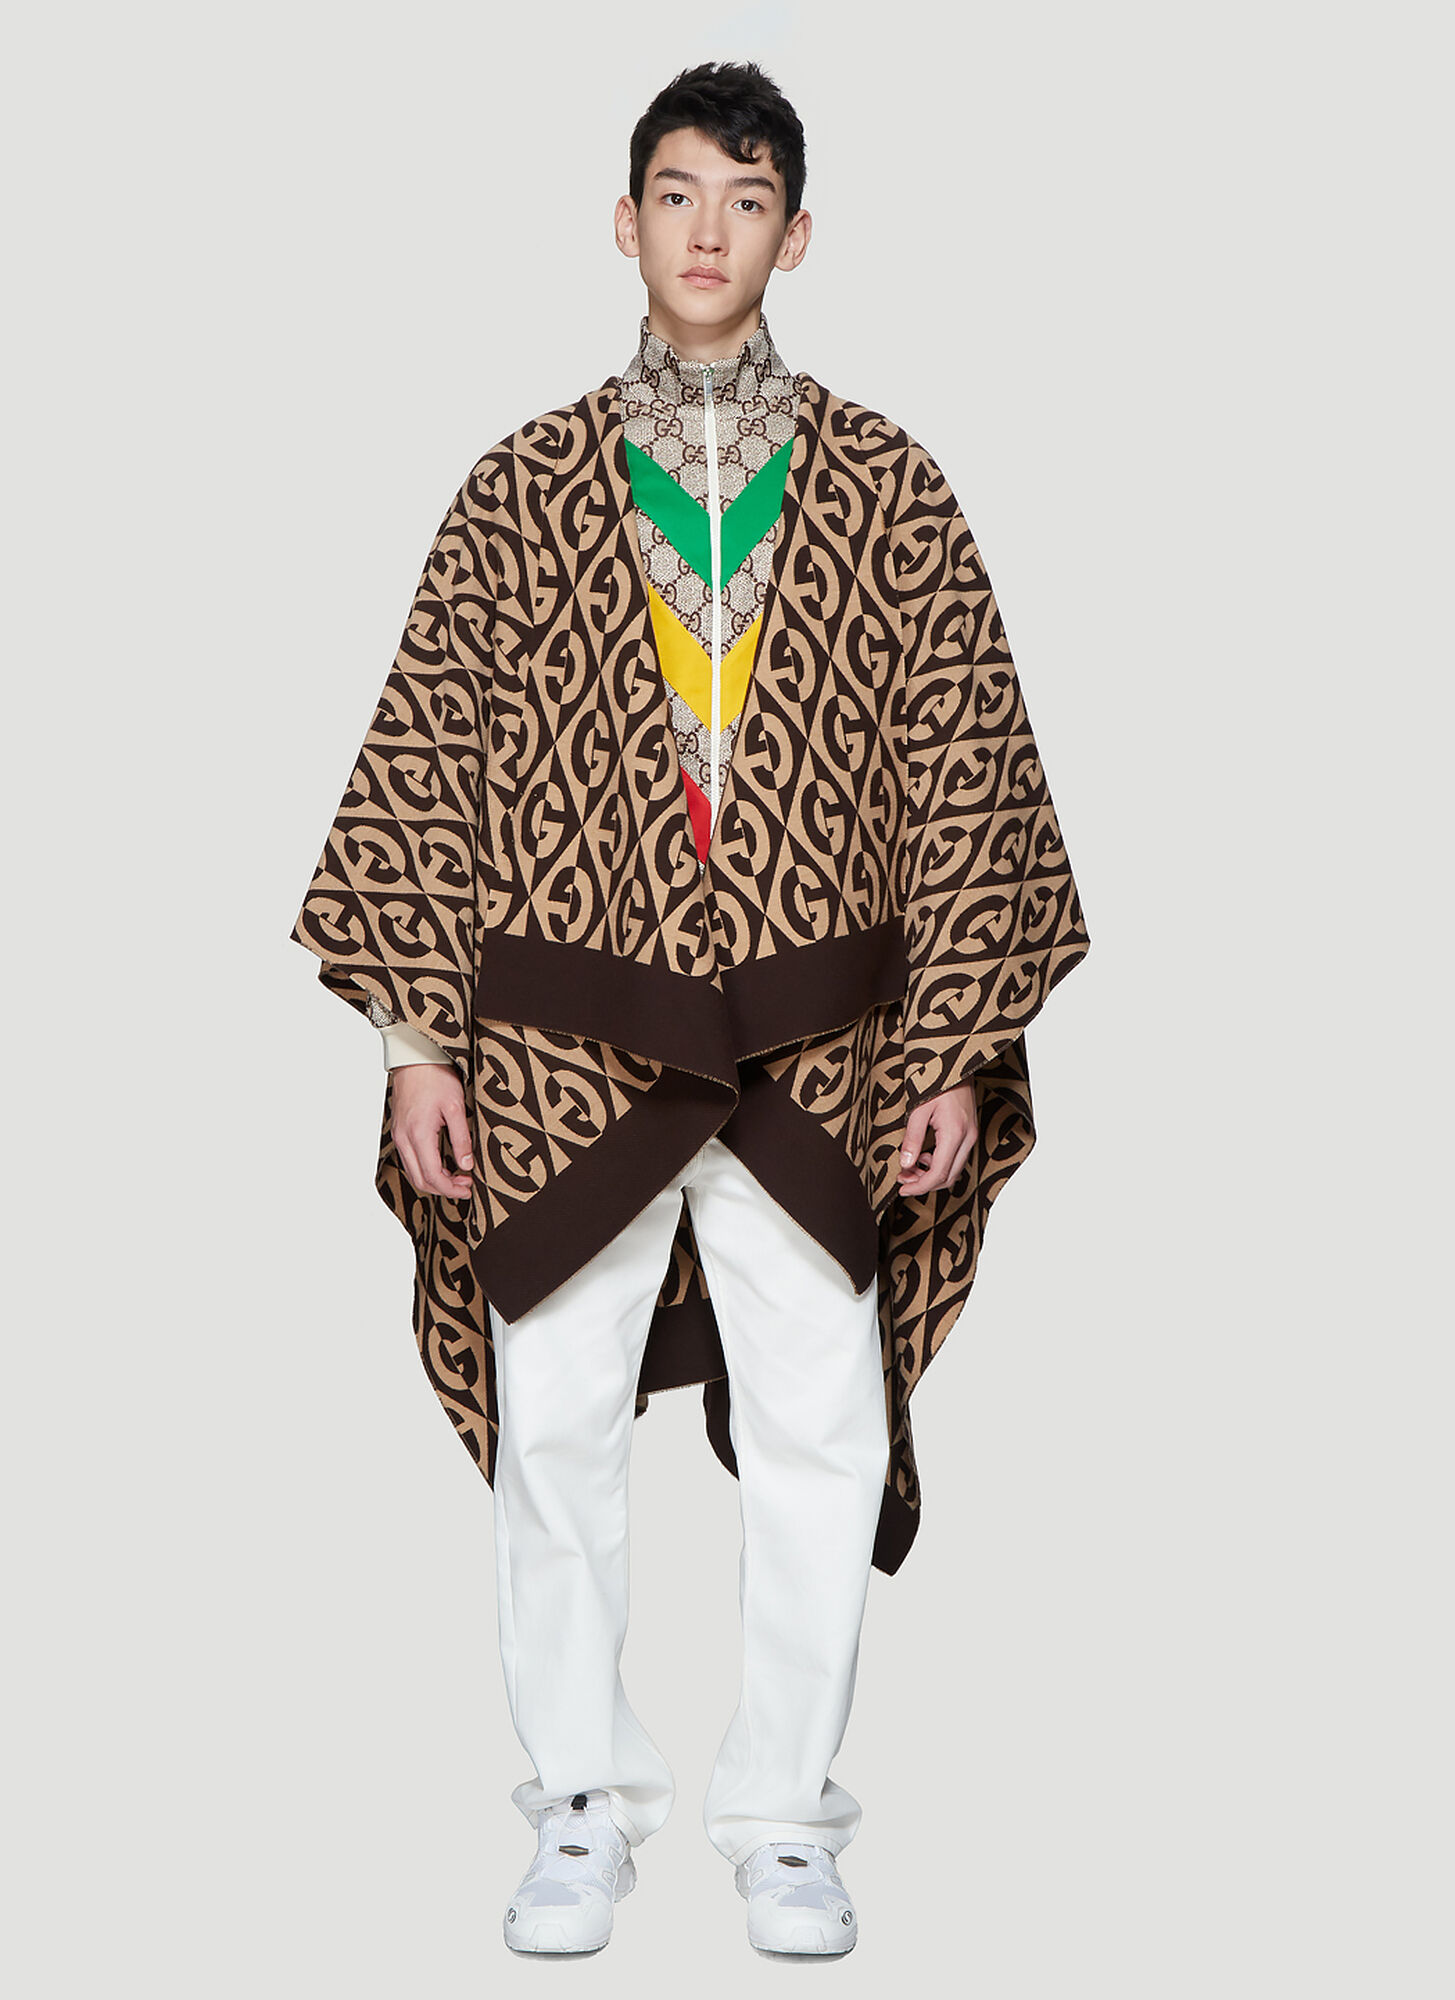 Gucci G Rhombus Poncho in Brown size One Size | The Fashionisto